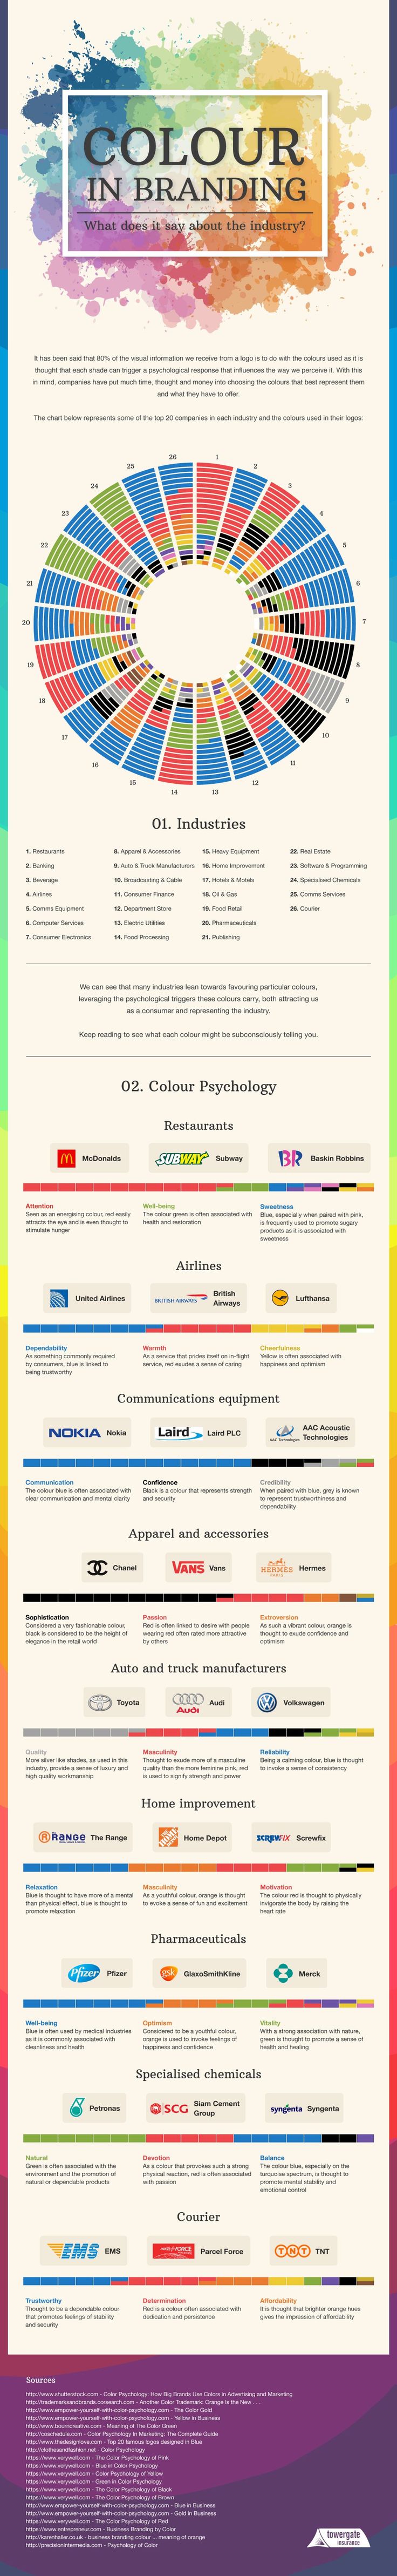 1569852550_342_Psychology-Infographic-Color-Psychology-In-Branding-Industry-Colors-Explained Psychology Infographic : Color Psychology In Branding: Industry Colors Explained [Infographic] | Social M...